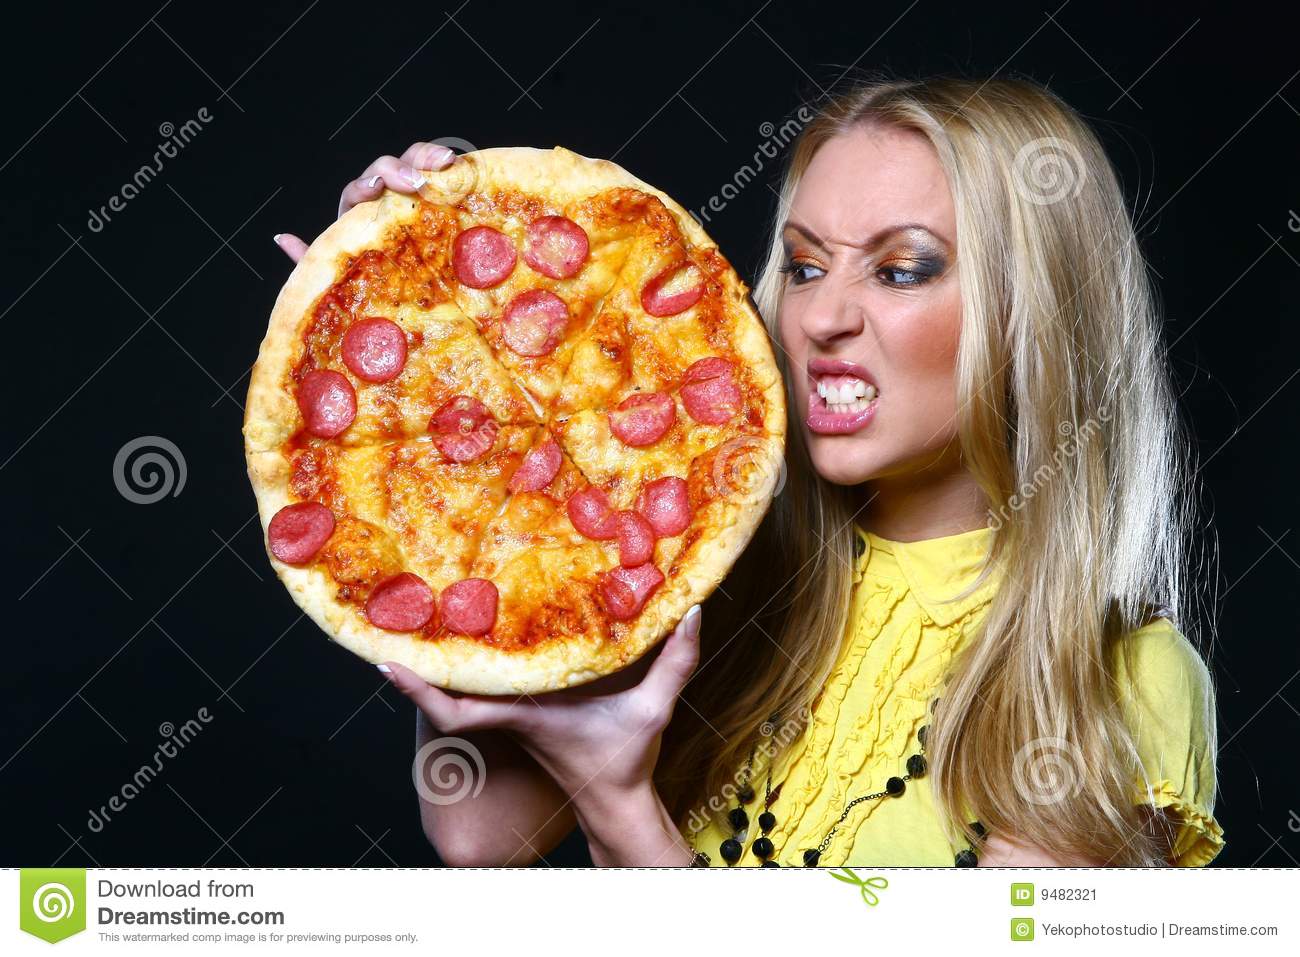 Beautiful Young Woman Eating Pizza Stock Image   Image  9482321